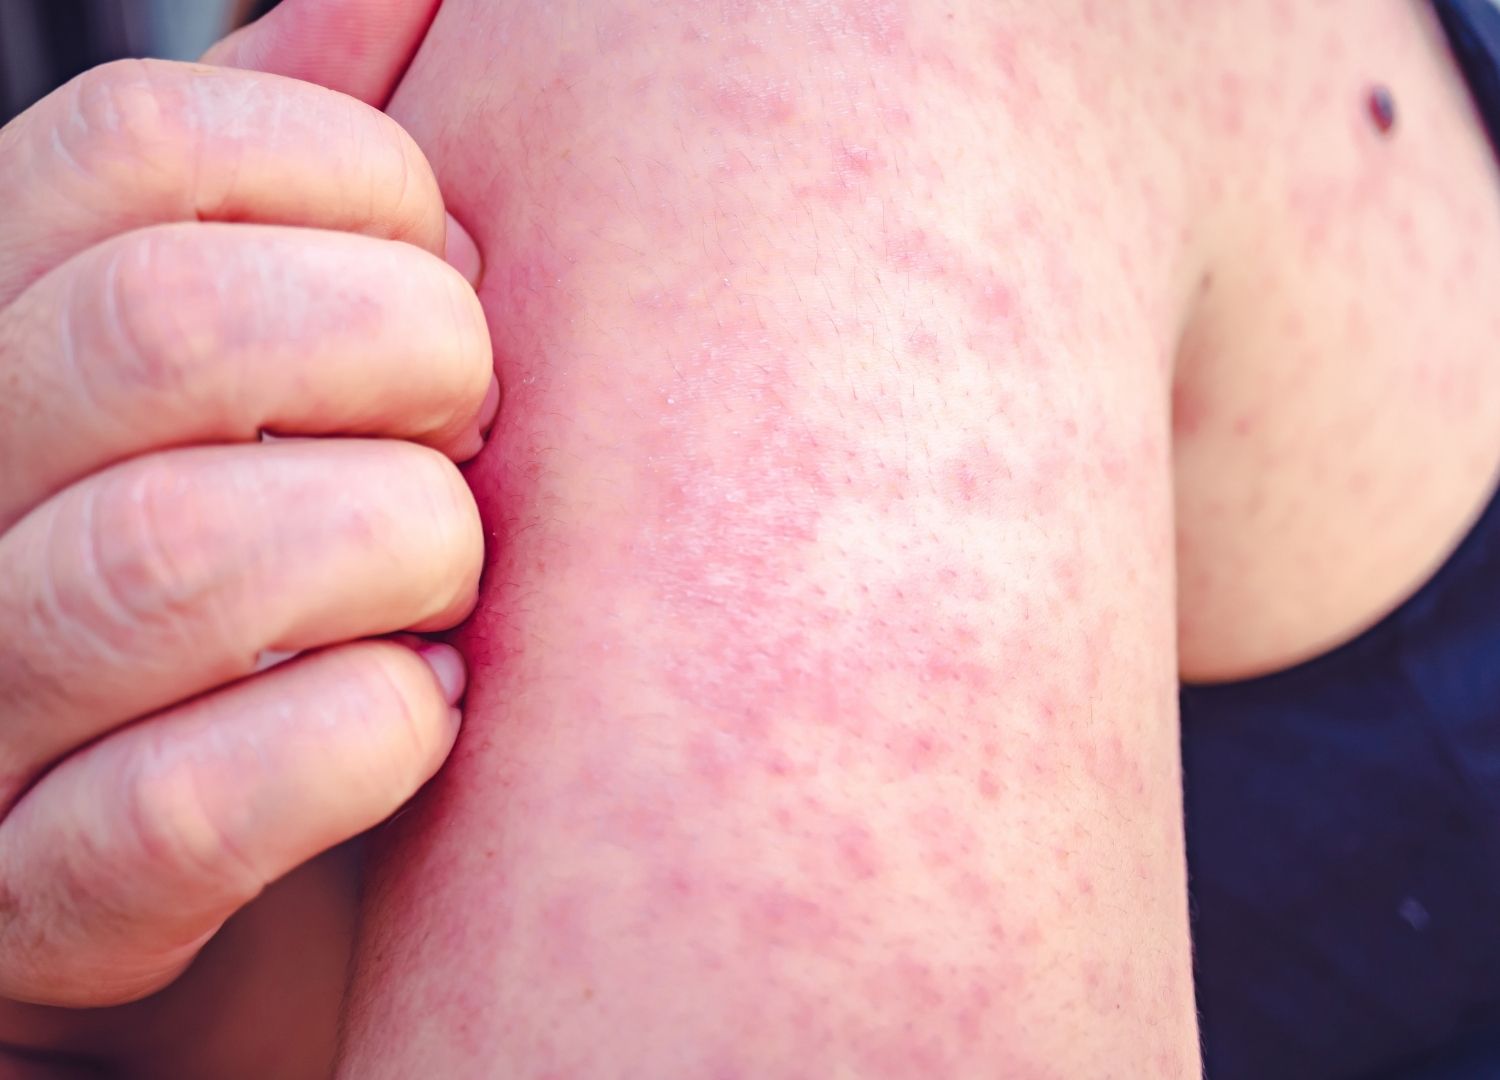 Do I have scabies?